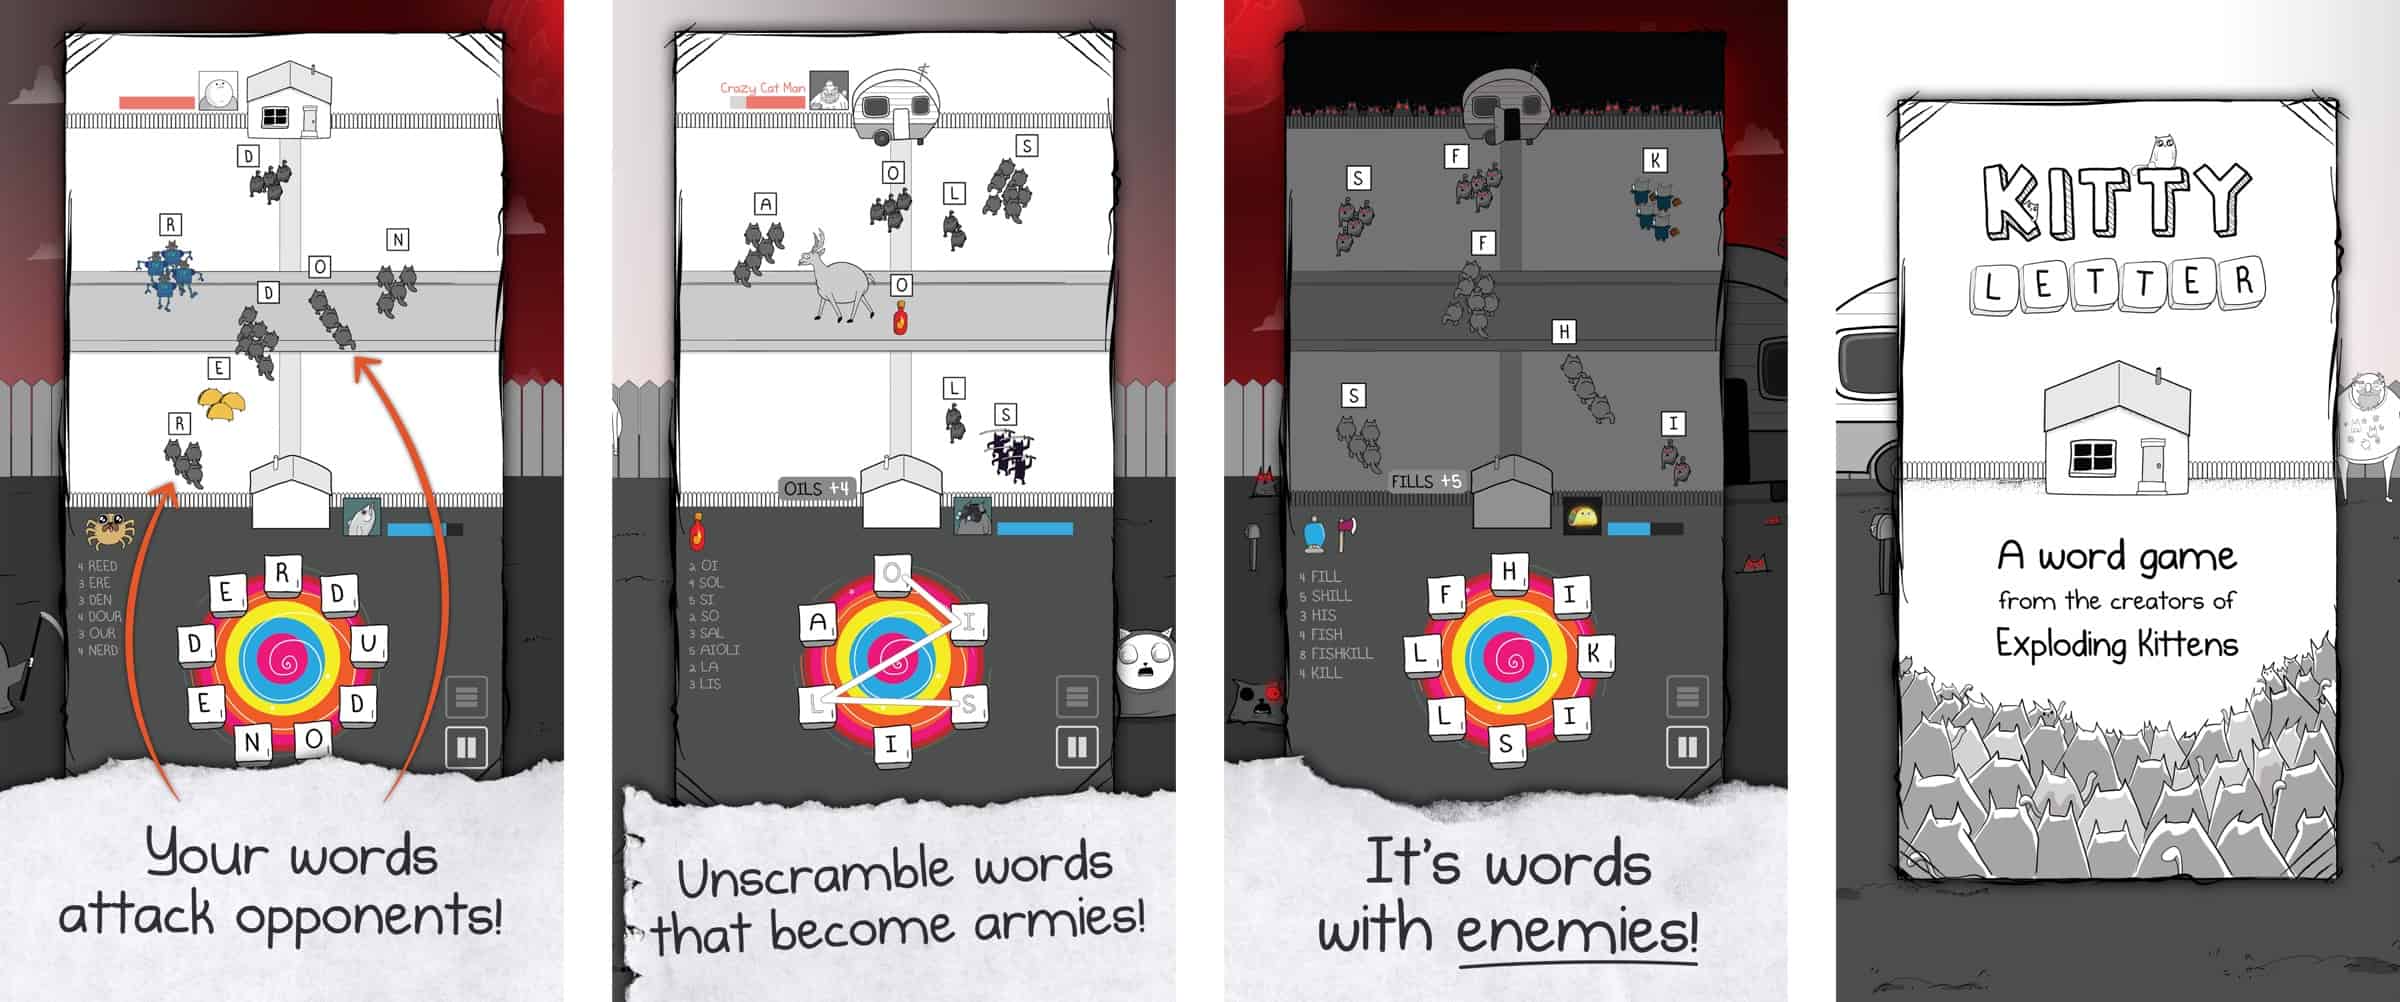 Puzzle Game ‘Kitty Letter’ Launches From The Oatmeal